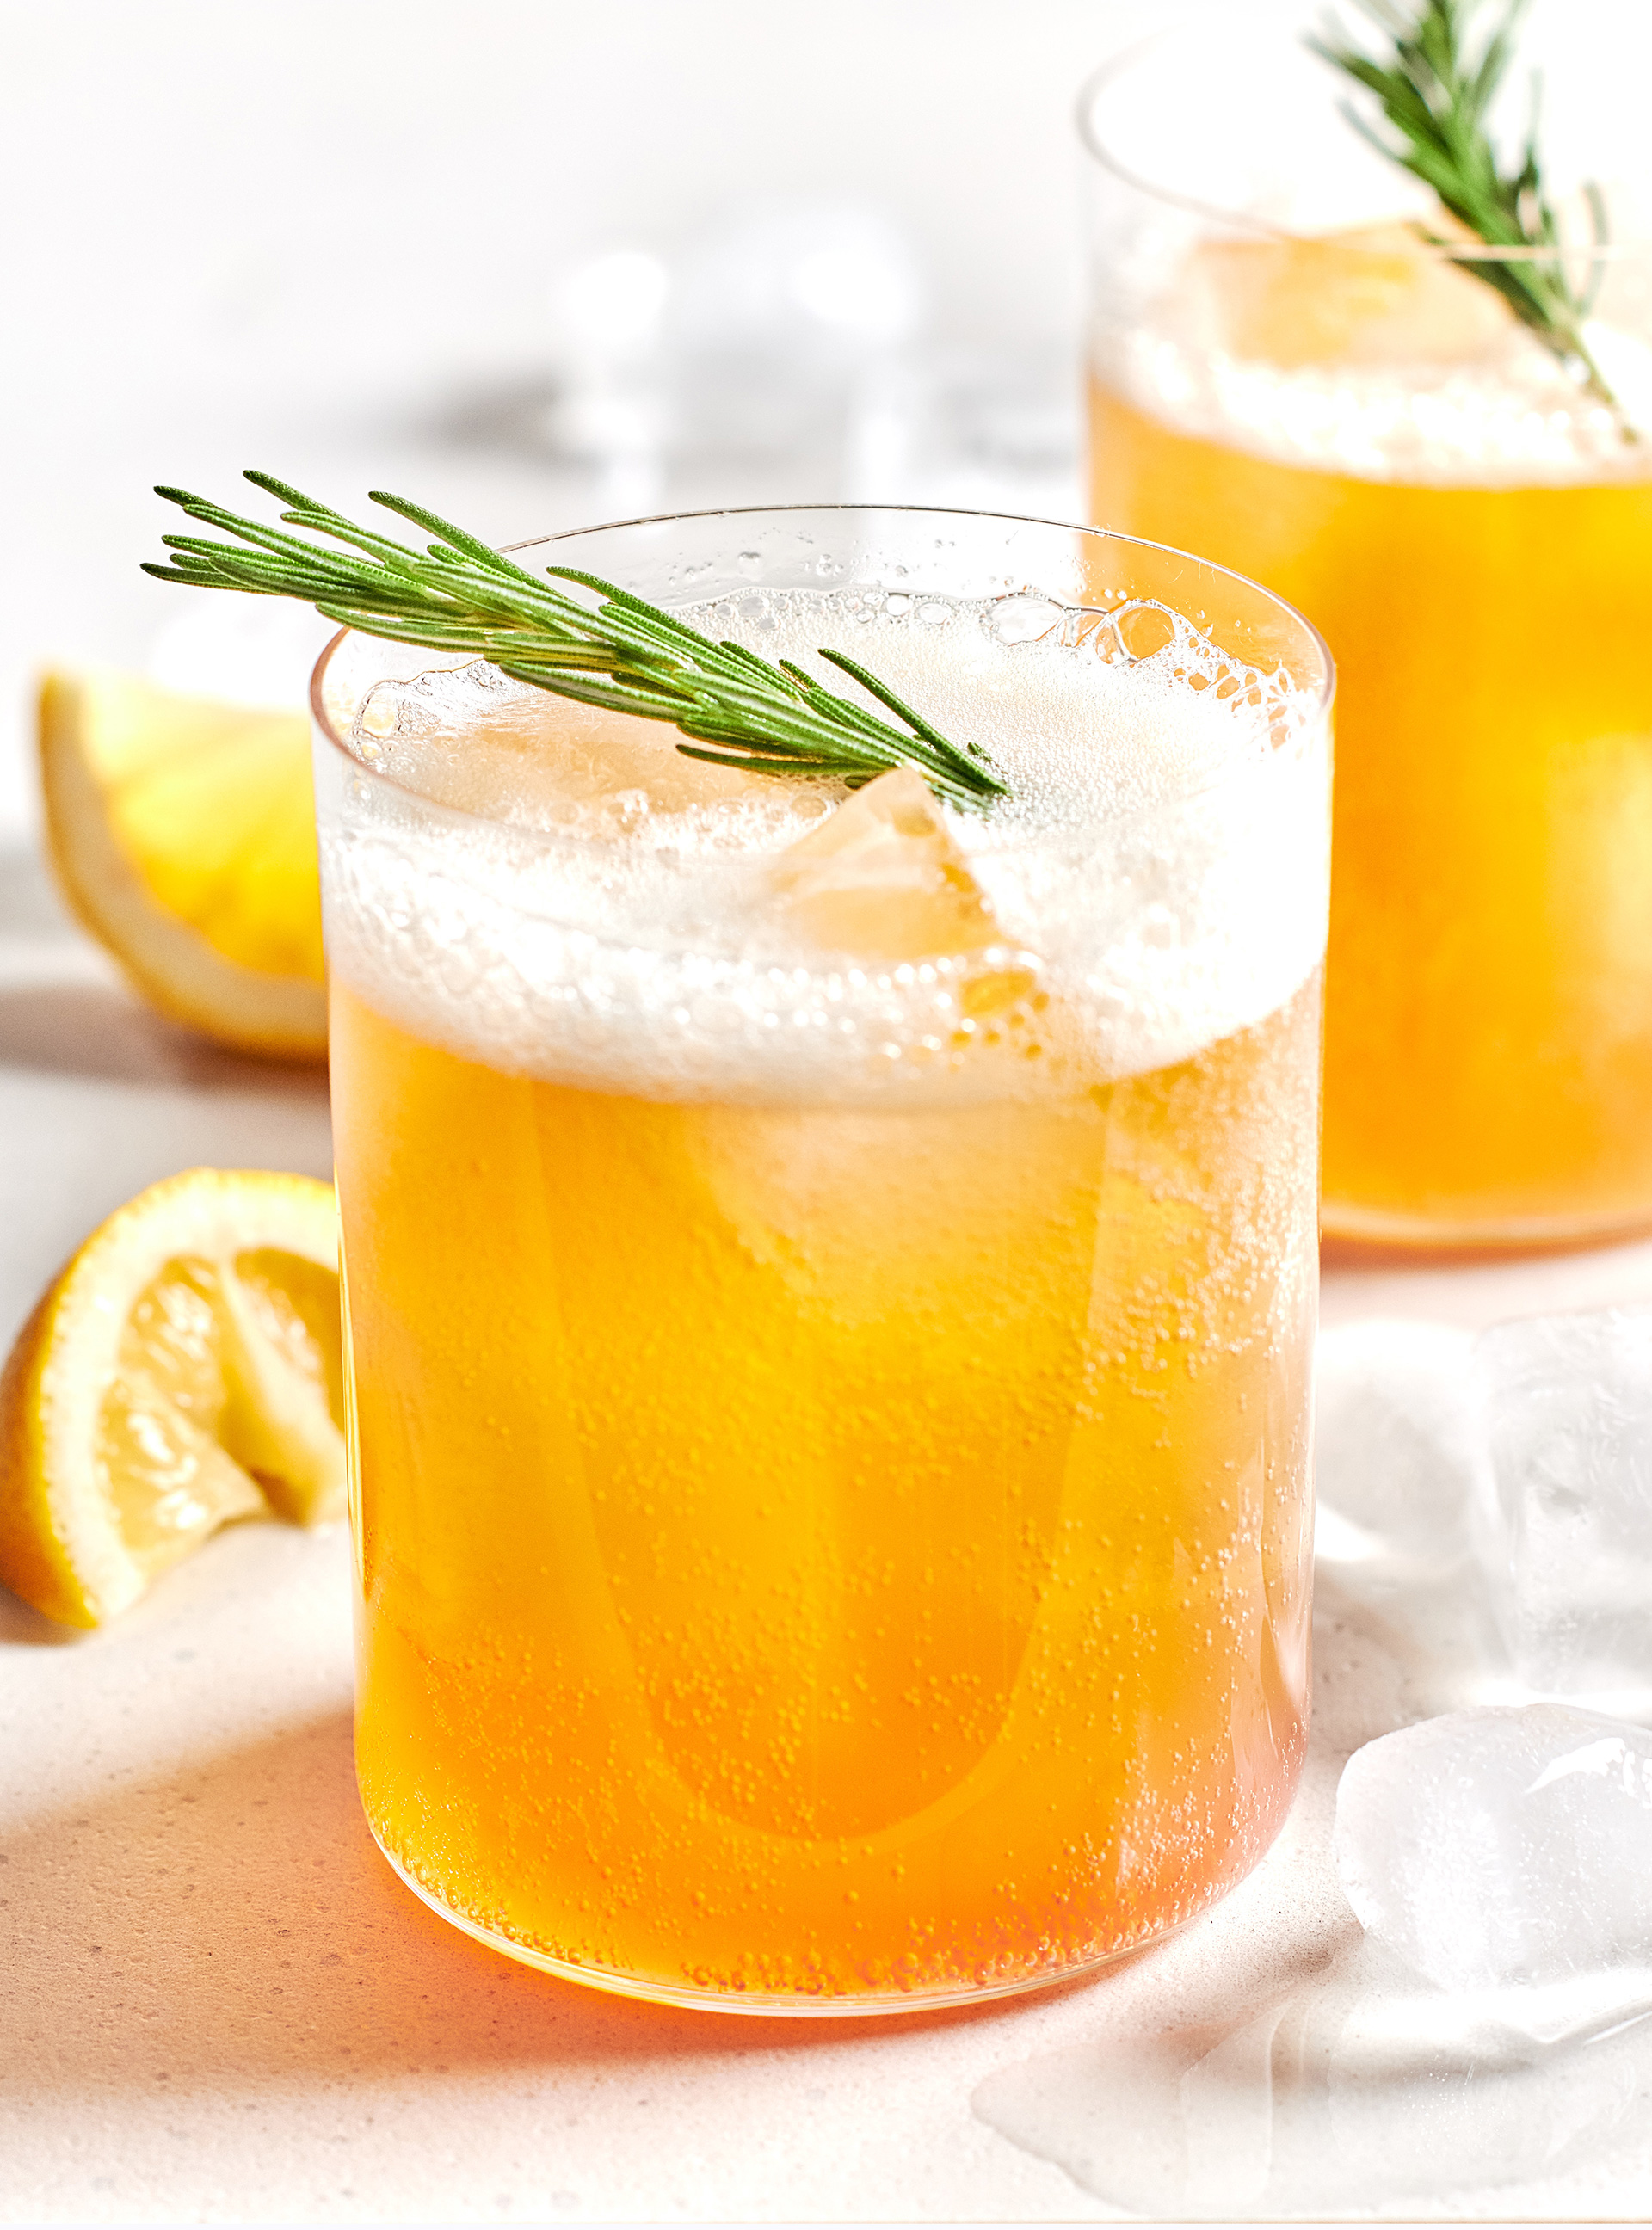 Beer, Spruce and Grapefruit Cocktail